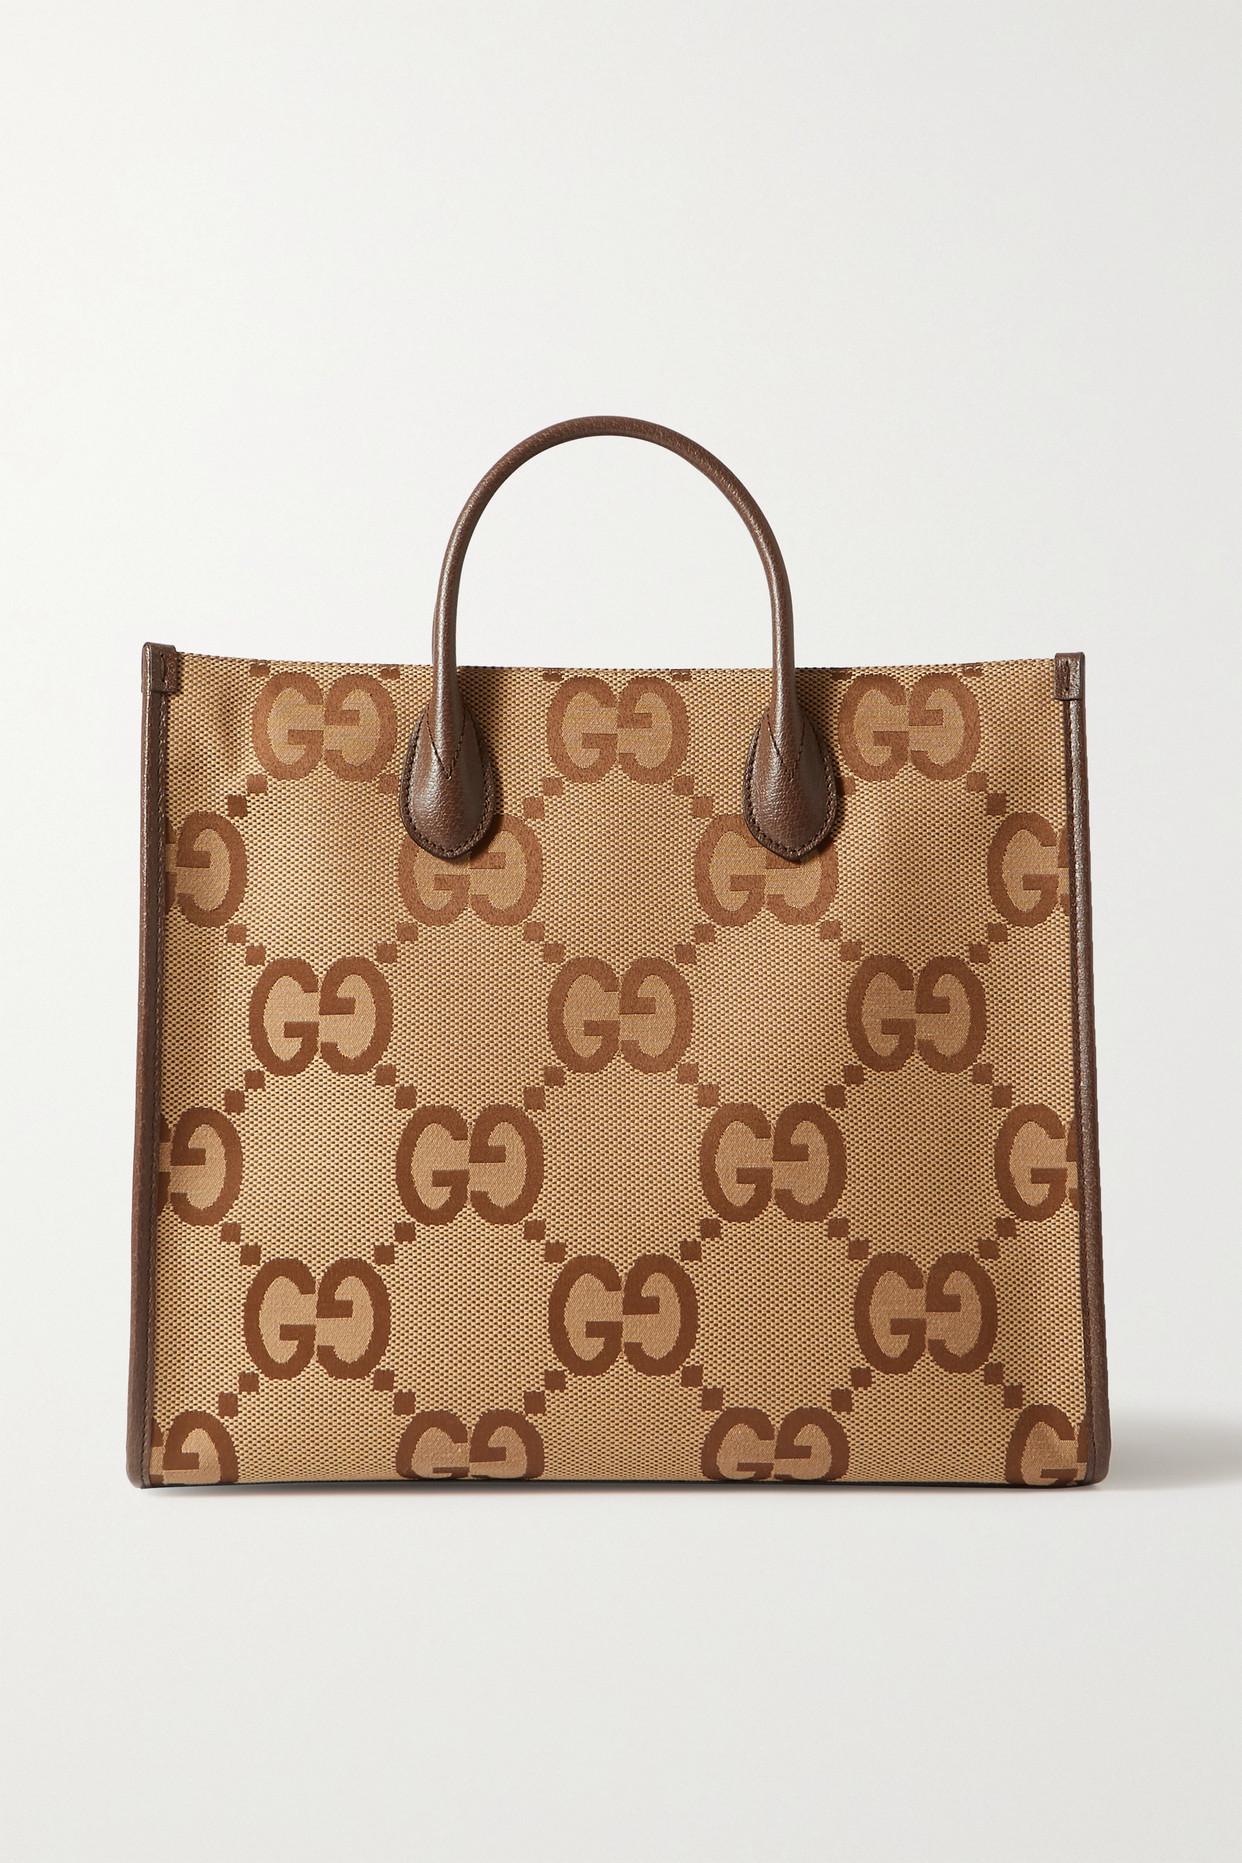 Gucci GG Mini Leather-trimmed Printed Coated-canvas Tote - Blue - One Size